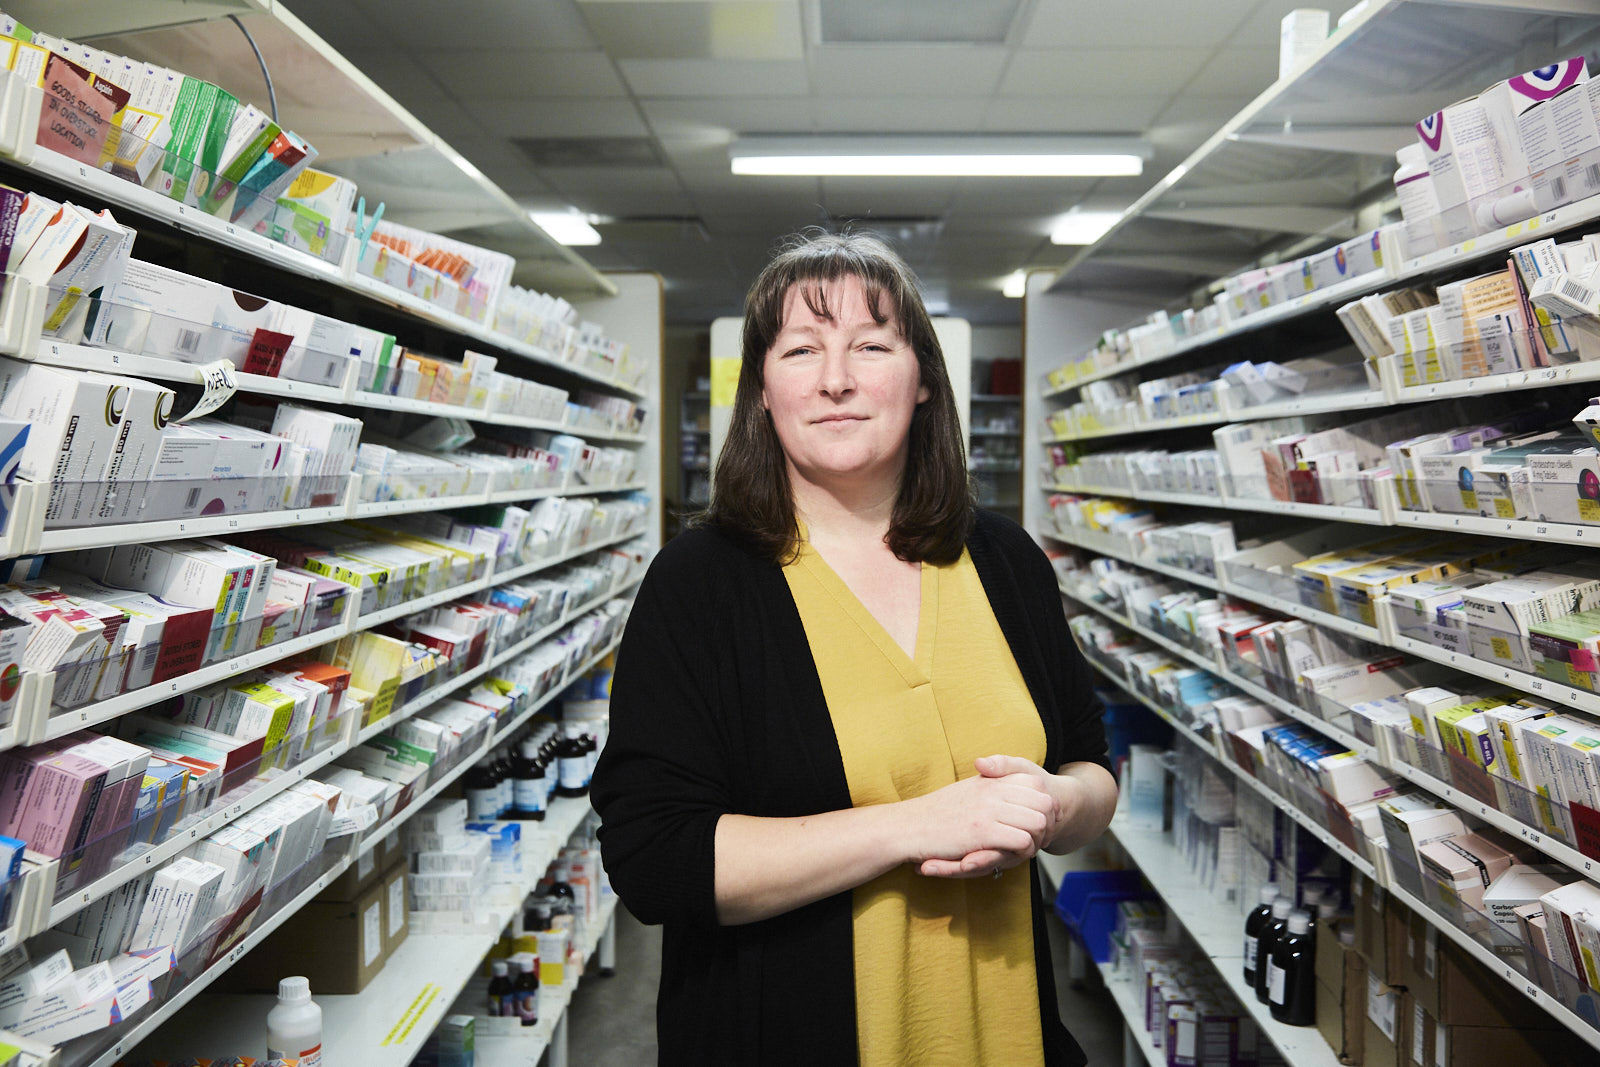 Suzanne wears a pale orange top and black cardigan, she stands between 2 racks of medicine at an NHS pharmacy. 